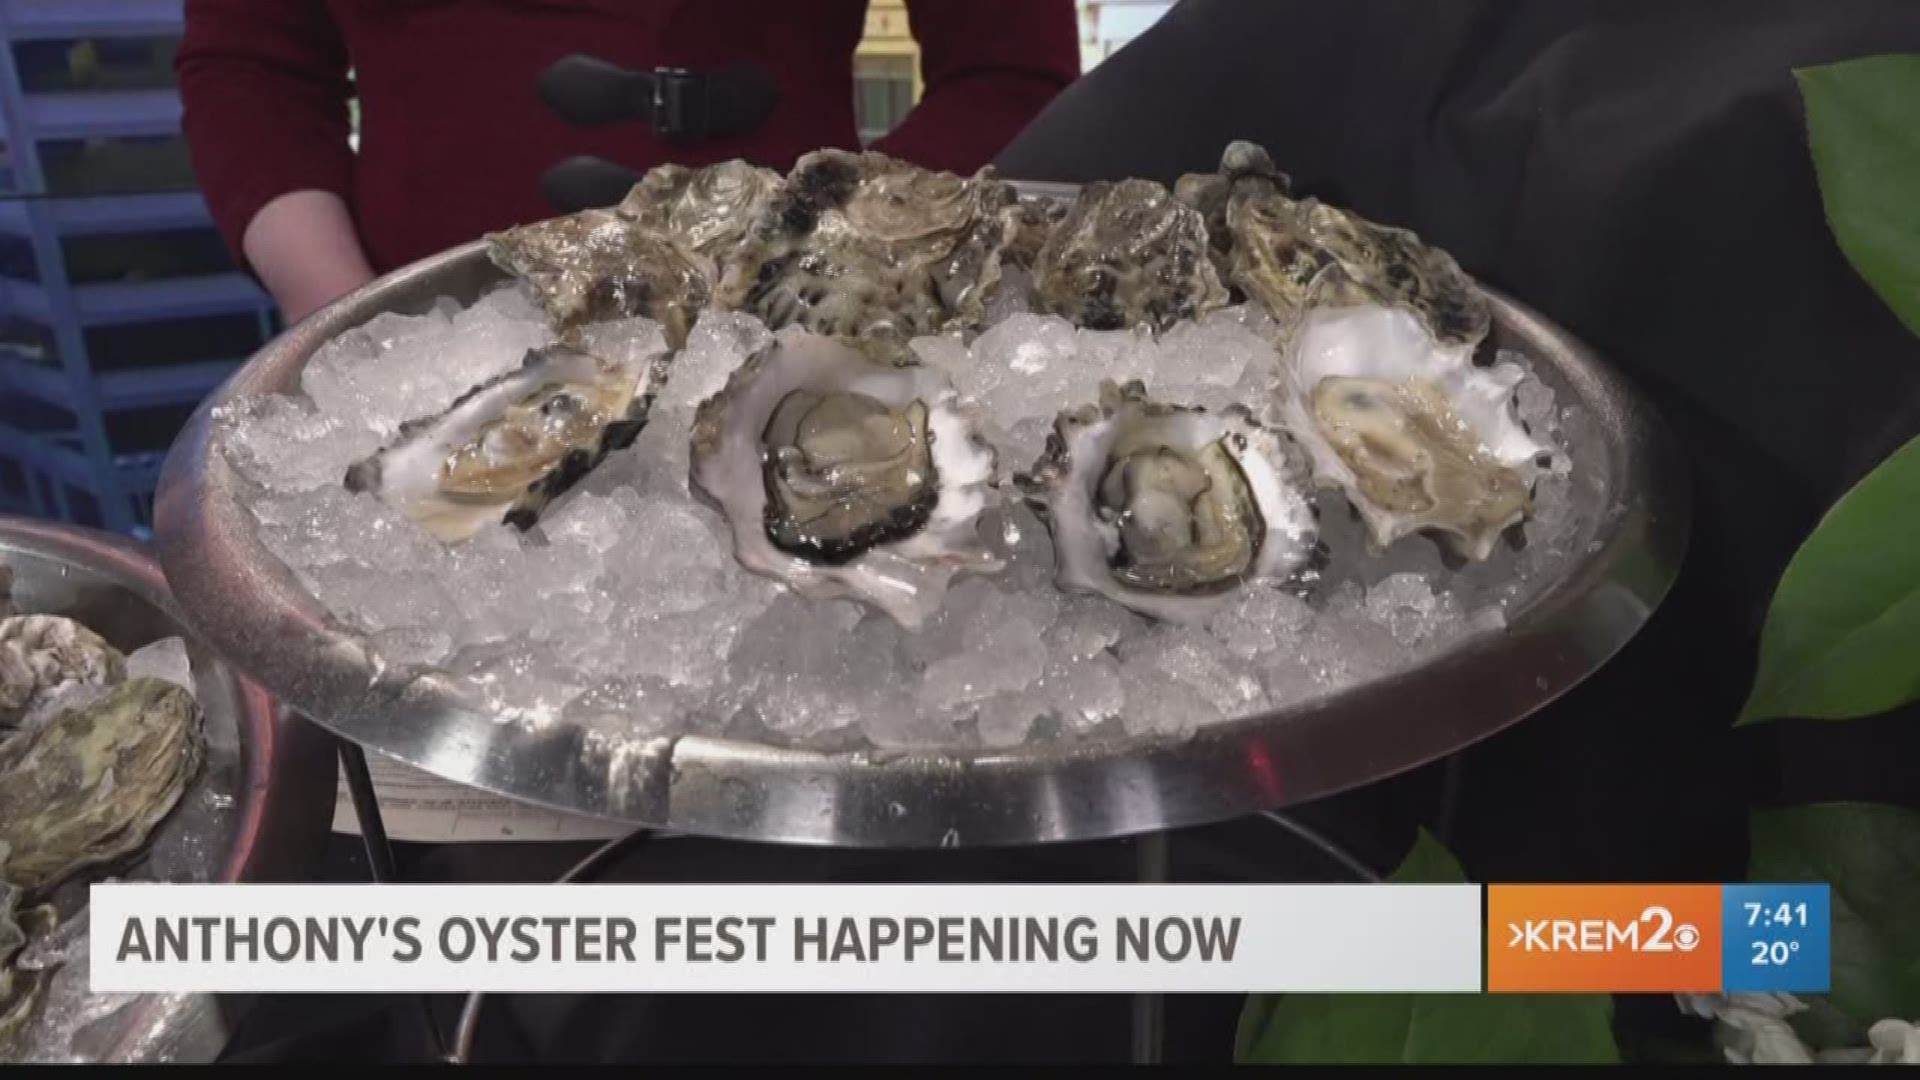 Bottoms up! Anthony's annual oyster fest is happening now.